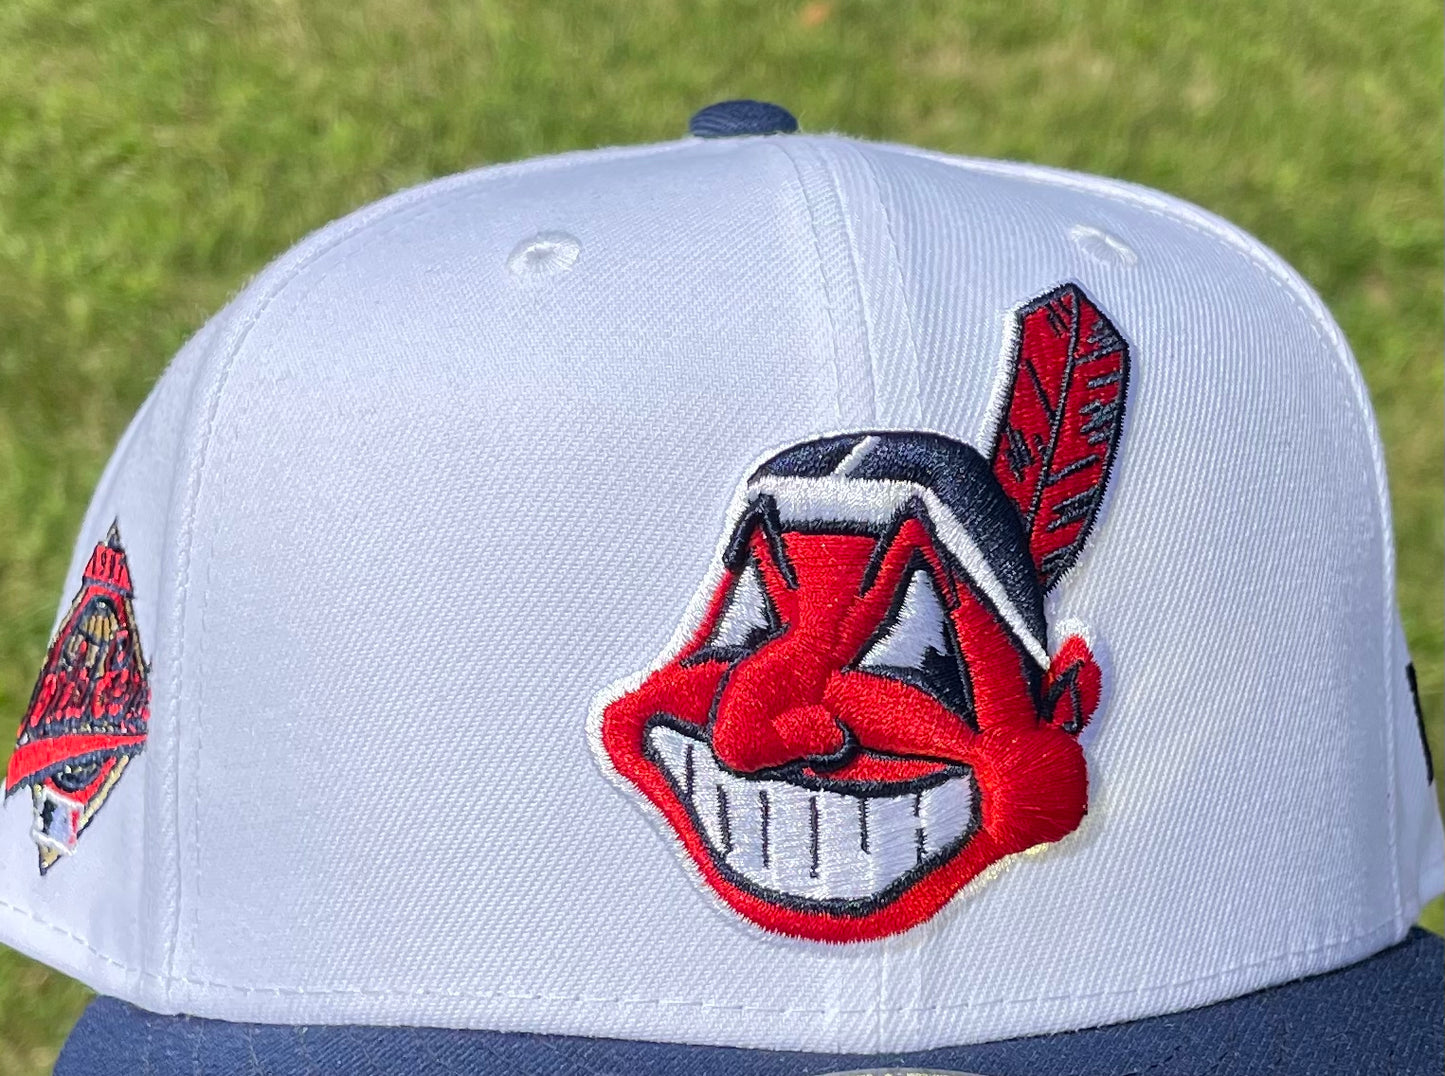 Cleveland Indians Chief Wahoo Banned Logo 1997 World Series Fitted (White/Navy) + Pin